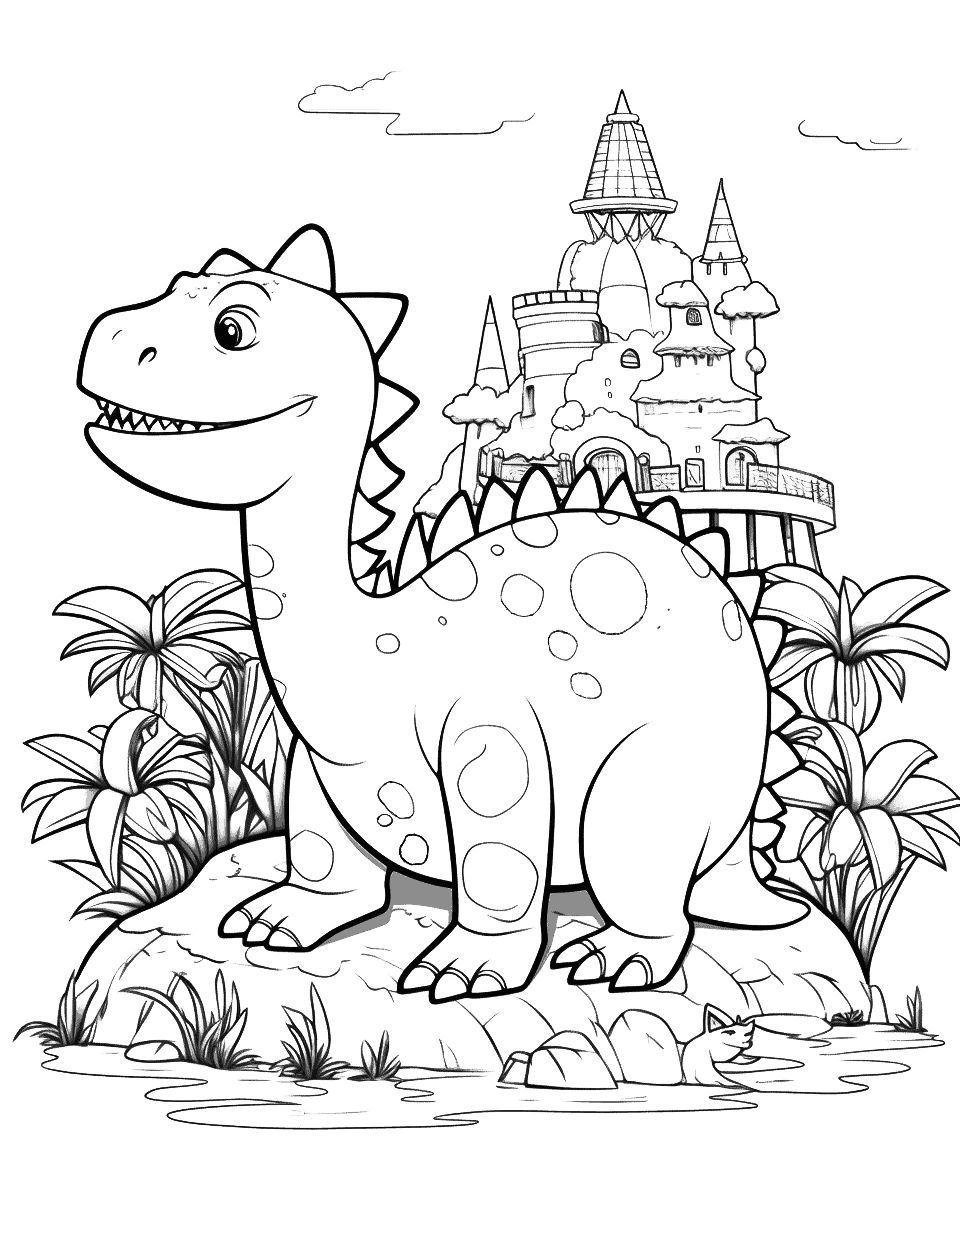 Lego Dinosaur Island Coloring Page - An imaginative coloring page featuring a dinosaur island built from Lego.